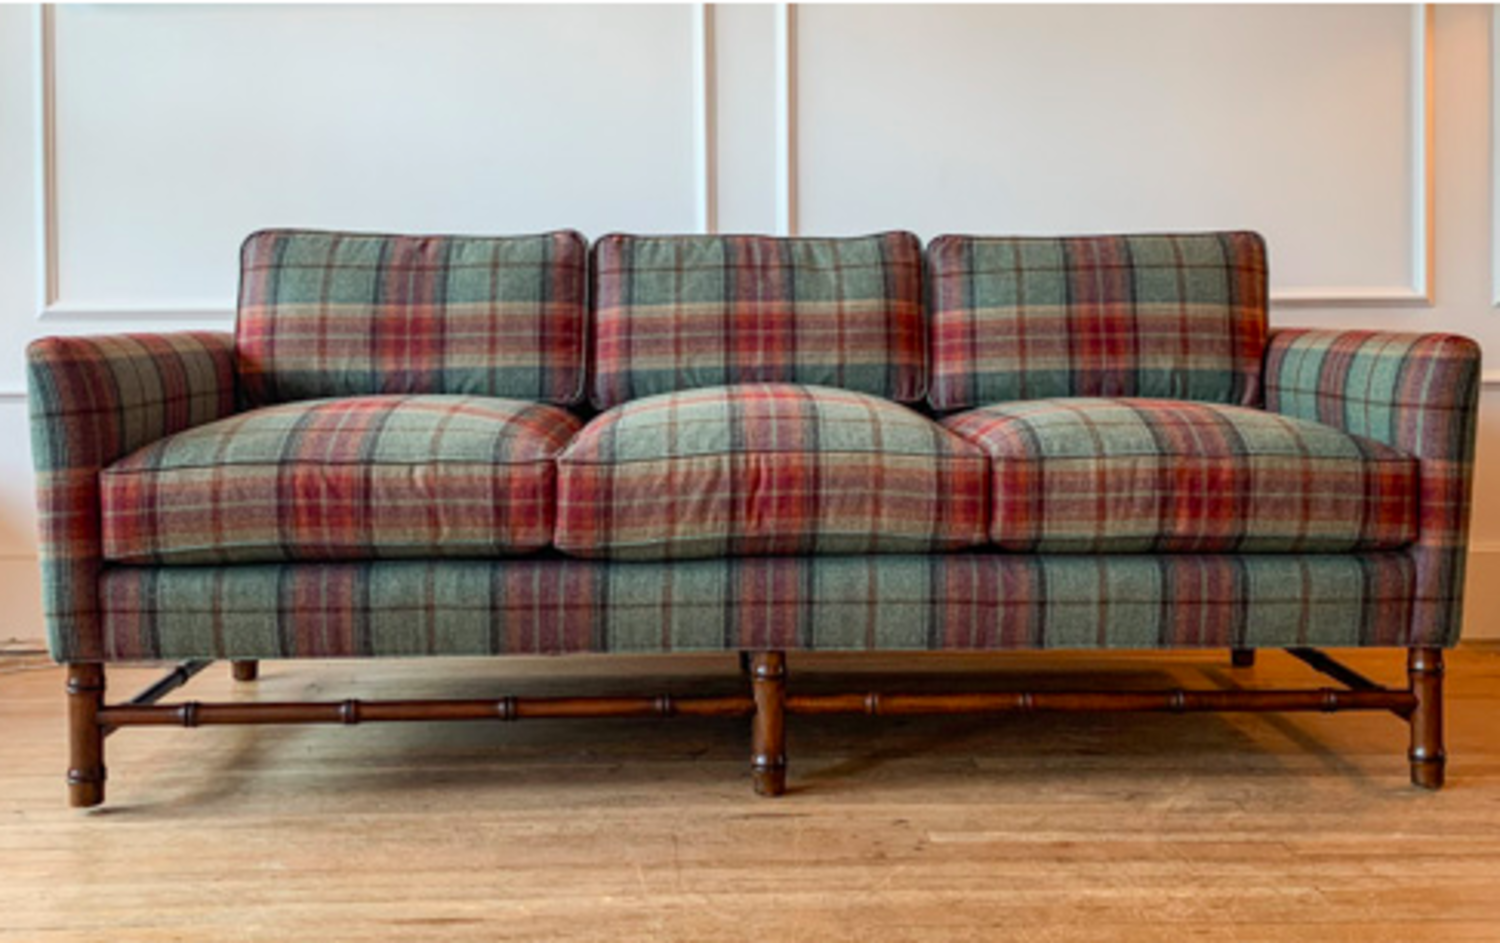 Bamboo Sofa in Plaid by Bunny Williams Home, in-stock couch Vancouver -  Gild & Co.